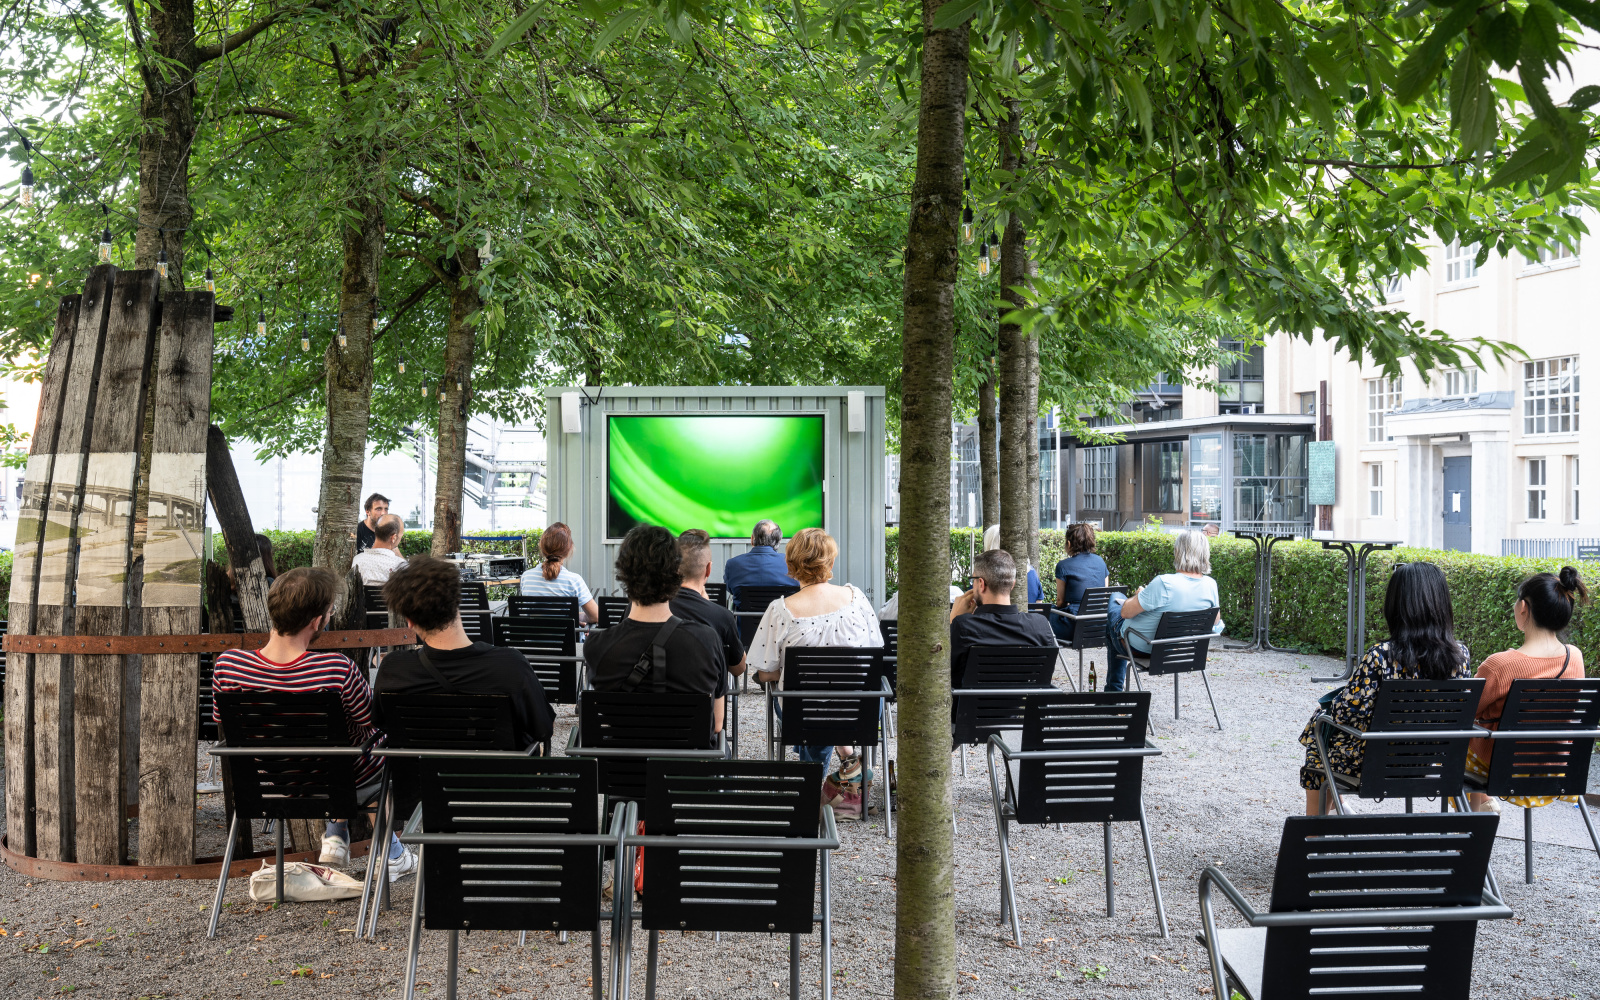 A large screen with people in chairs in front of it outside under green trees.